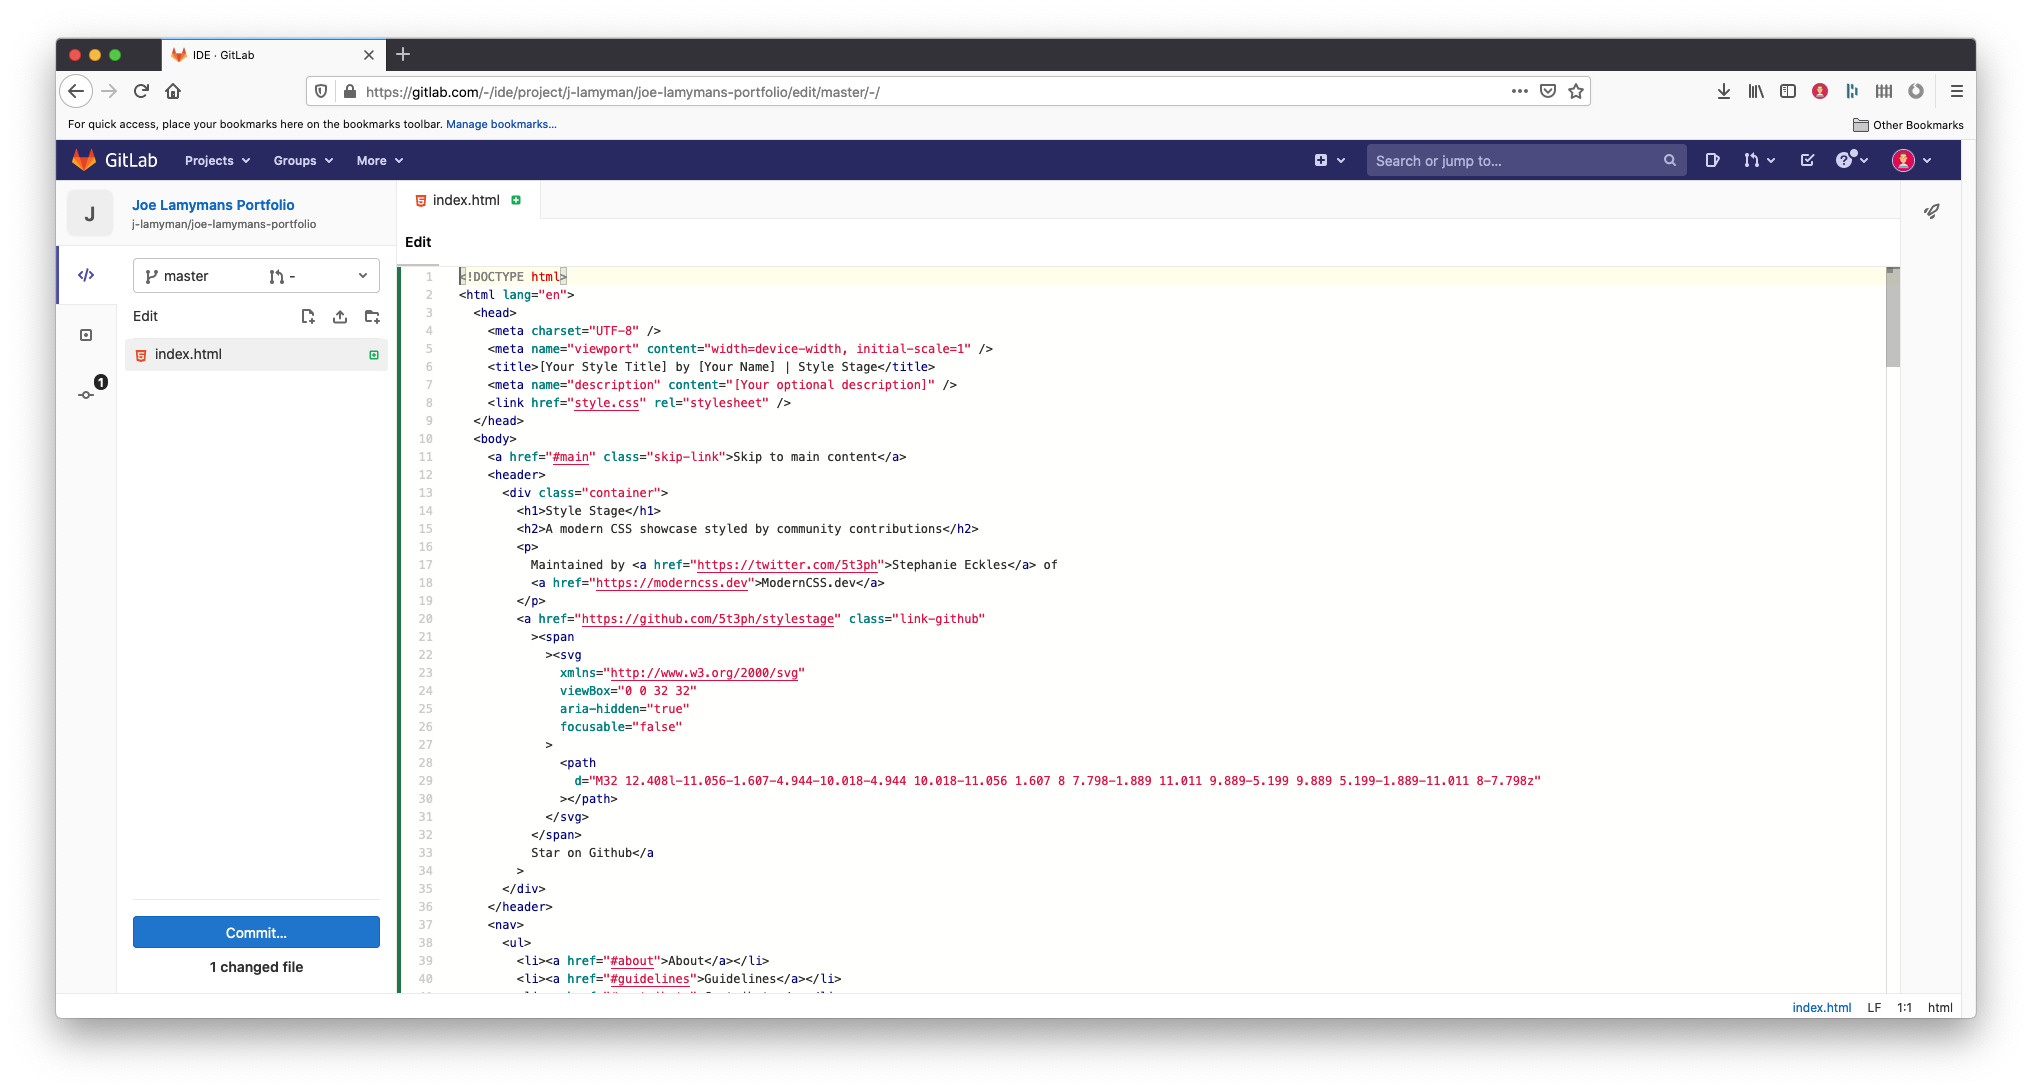 A screenshot of the Gitlab's in browser code editor. The screen features a menu down the left which shows the files that the user has added. I have added an index.html file which is visible. The majority of the screen is taken up by HTML5 code that I have copied and pasted in. Scanning this code, the user can see a <head> element containing references to a website called Style Stage. At the bottom of the screenshot is a button labelled 'Commit...' and some text letting the user know that 1 file has changed.